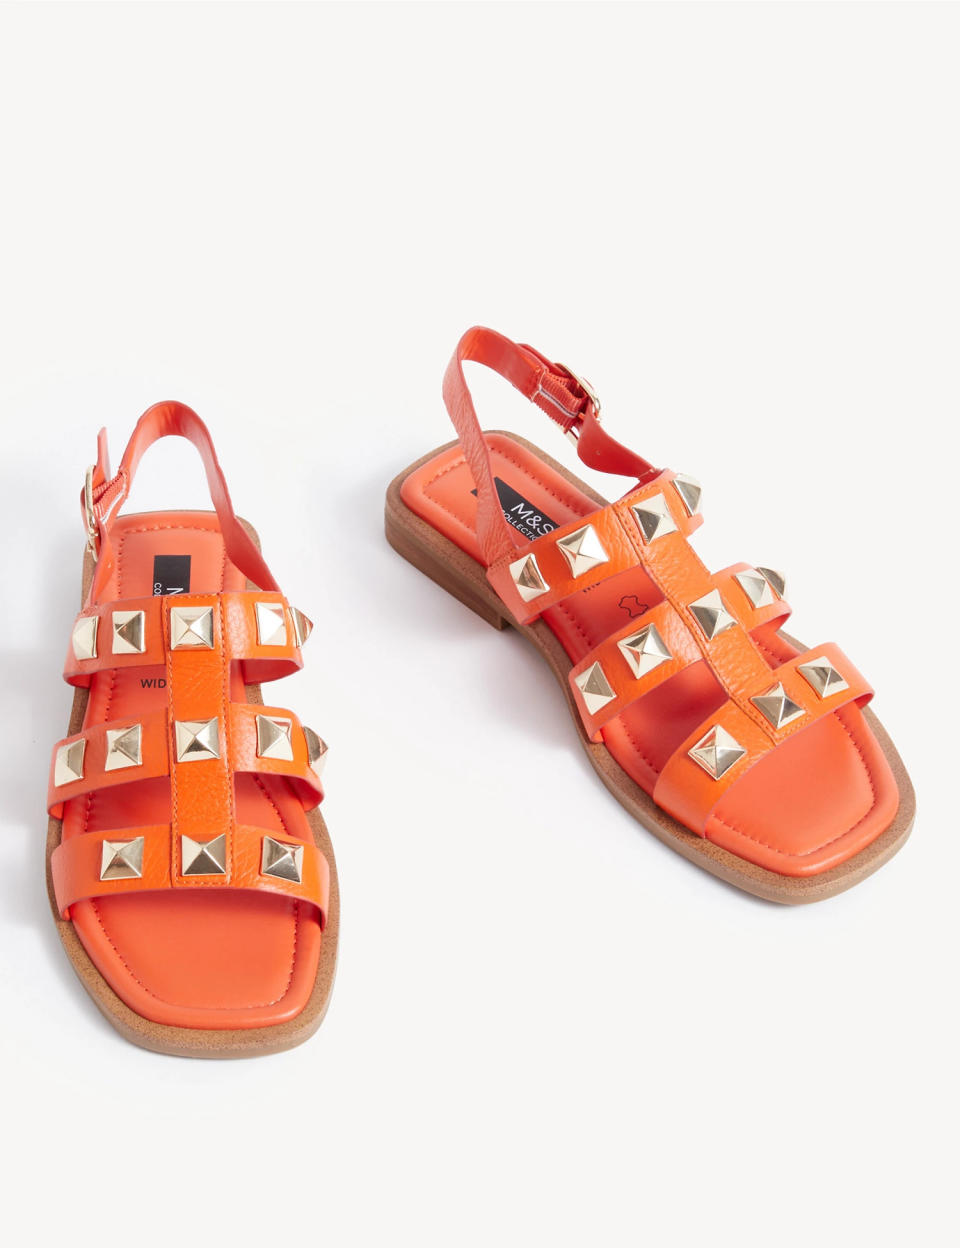 These citrus-bright lovelies are summer in a shoe. (Marks & Spencer)